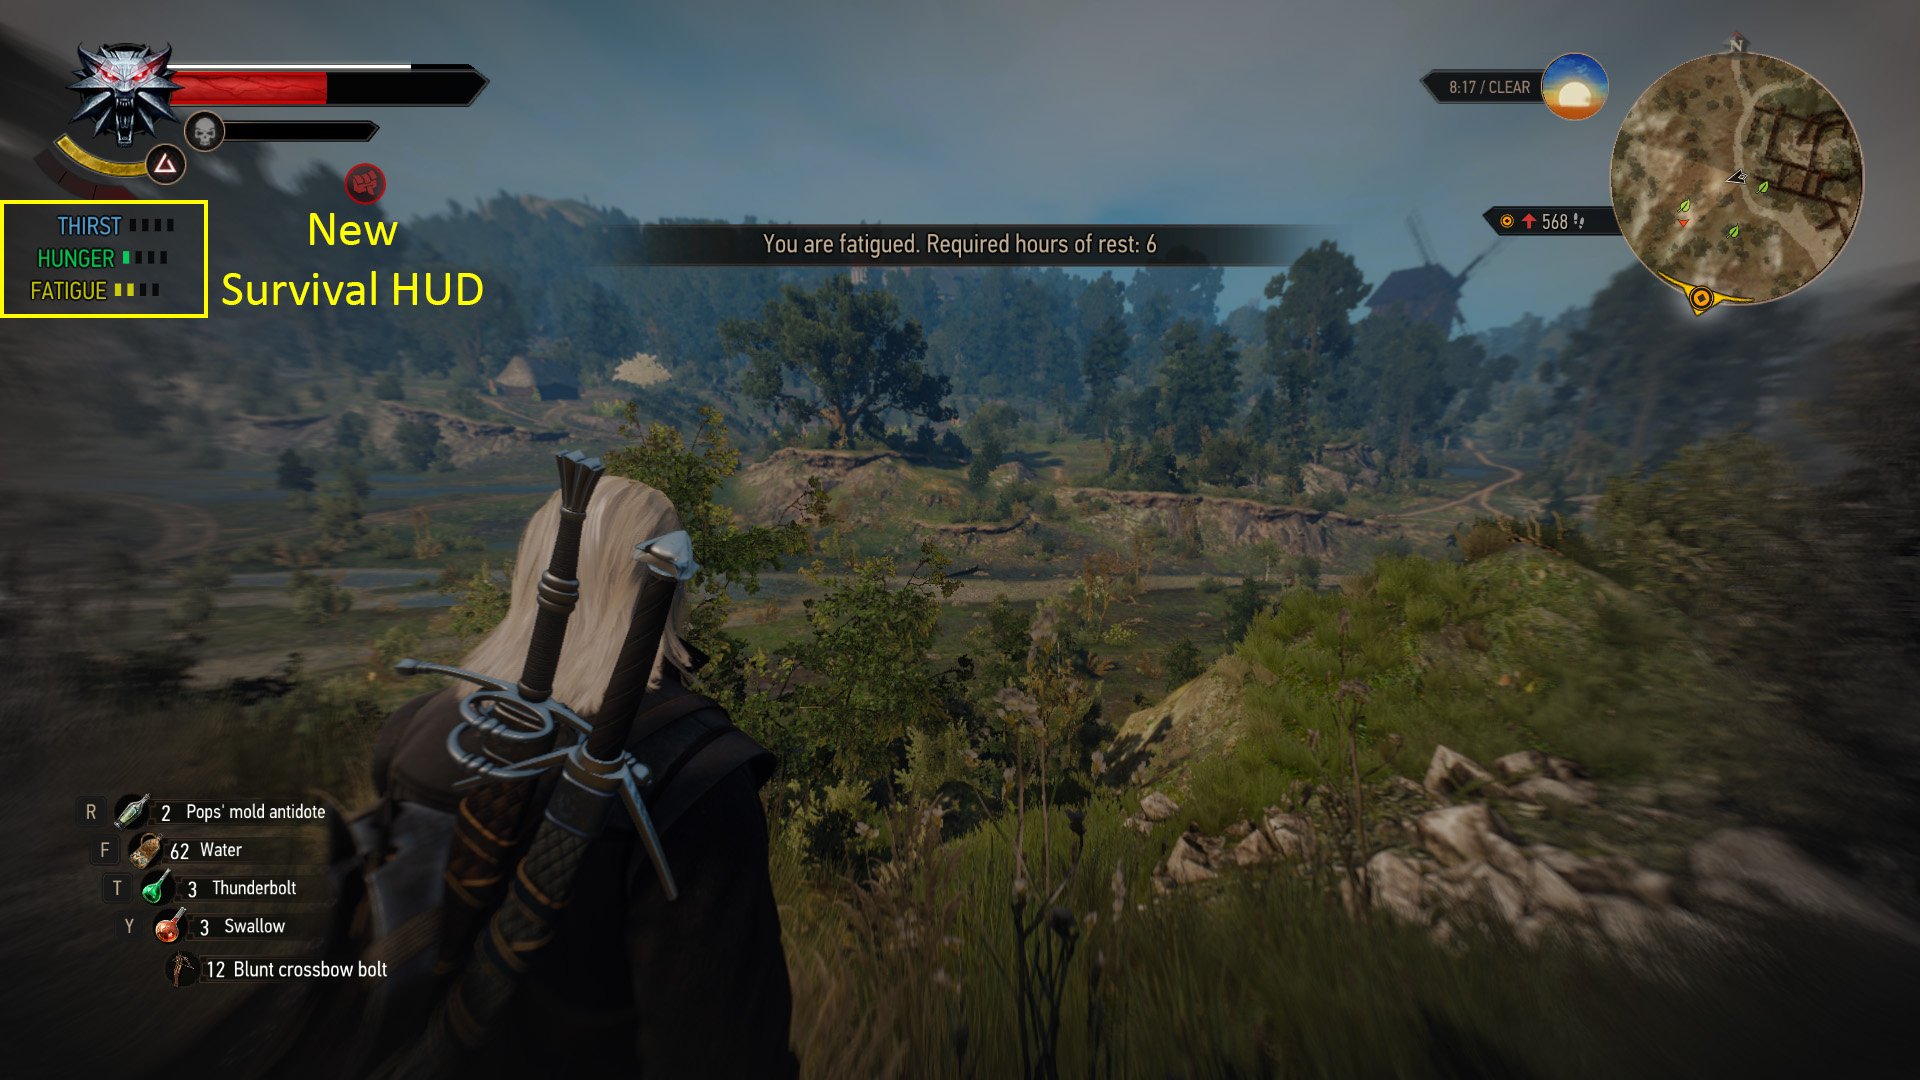 ModDB on "The Witcher 3 Redux mod for @witchergame: Wild Hunt completely overhauls combat, with Dark Souls-like stamina, free targeting, new skill distribution, survival mechanics https://t.co/7Tqn9QL4Lo https://t.co/Sx0ZHg4EGk" Twitter